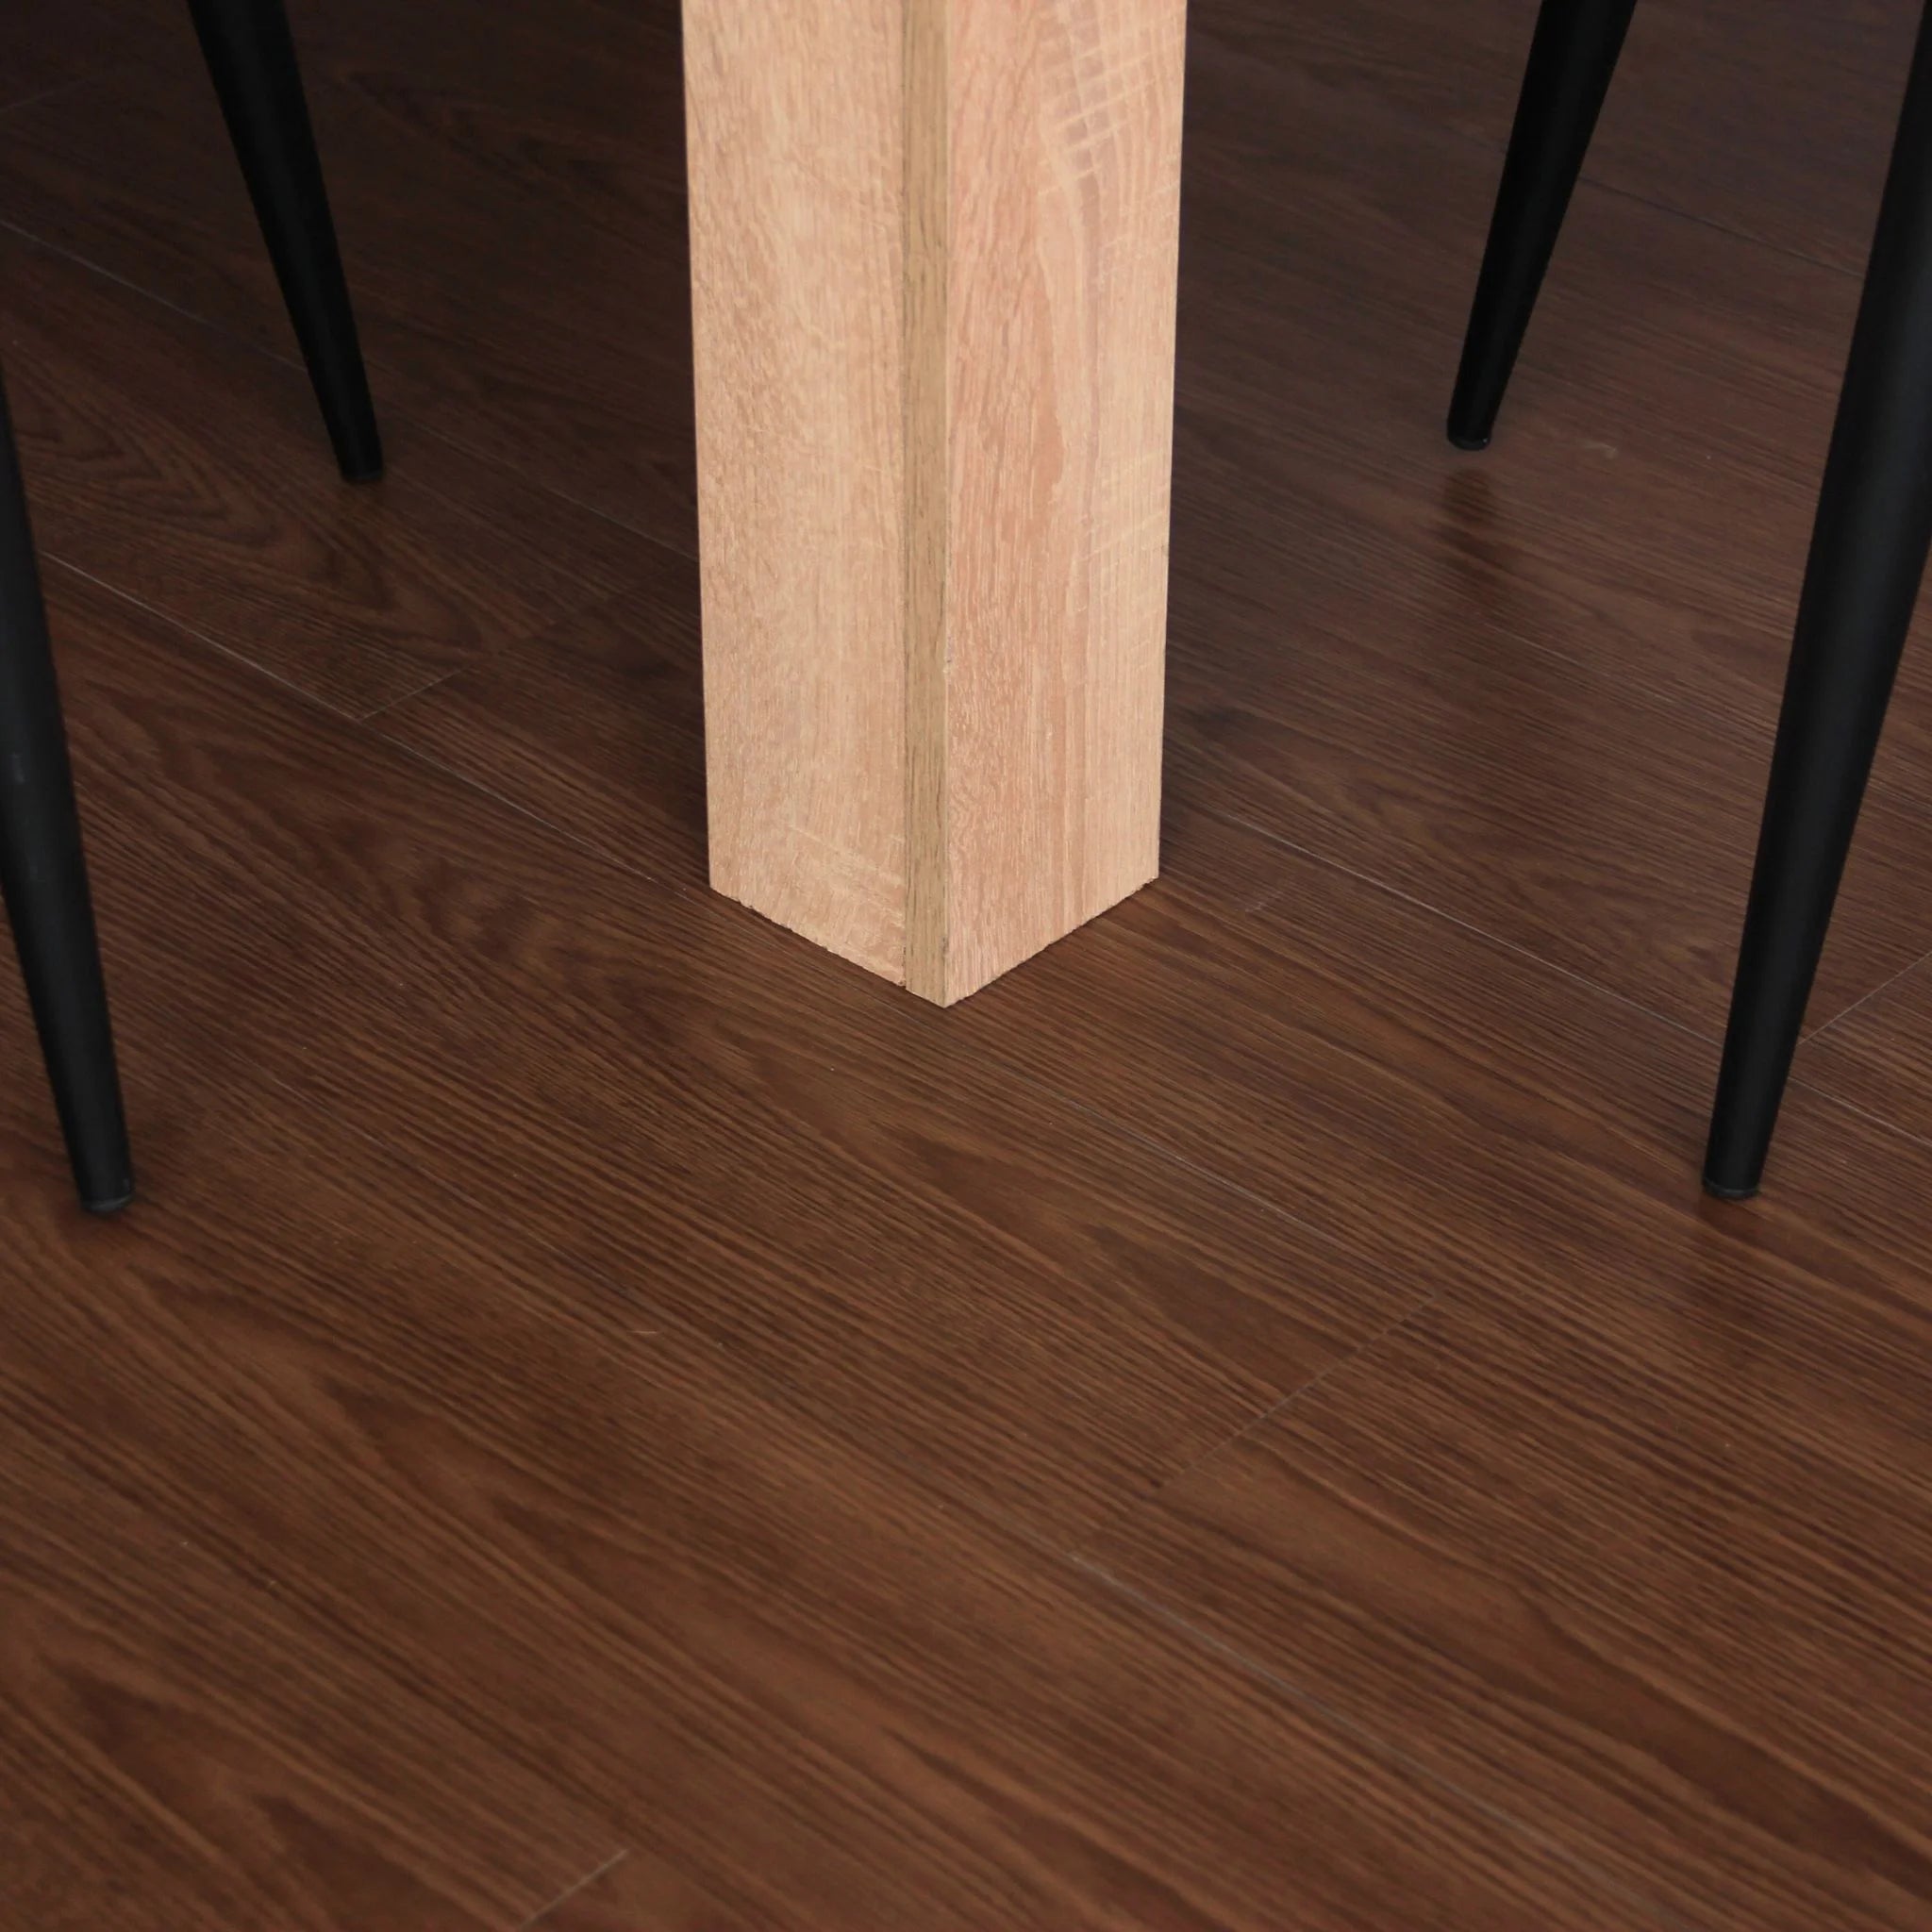 brown wood effect vinyl flooring under a table and black metal chairs